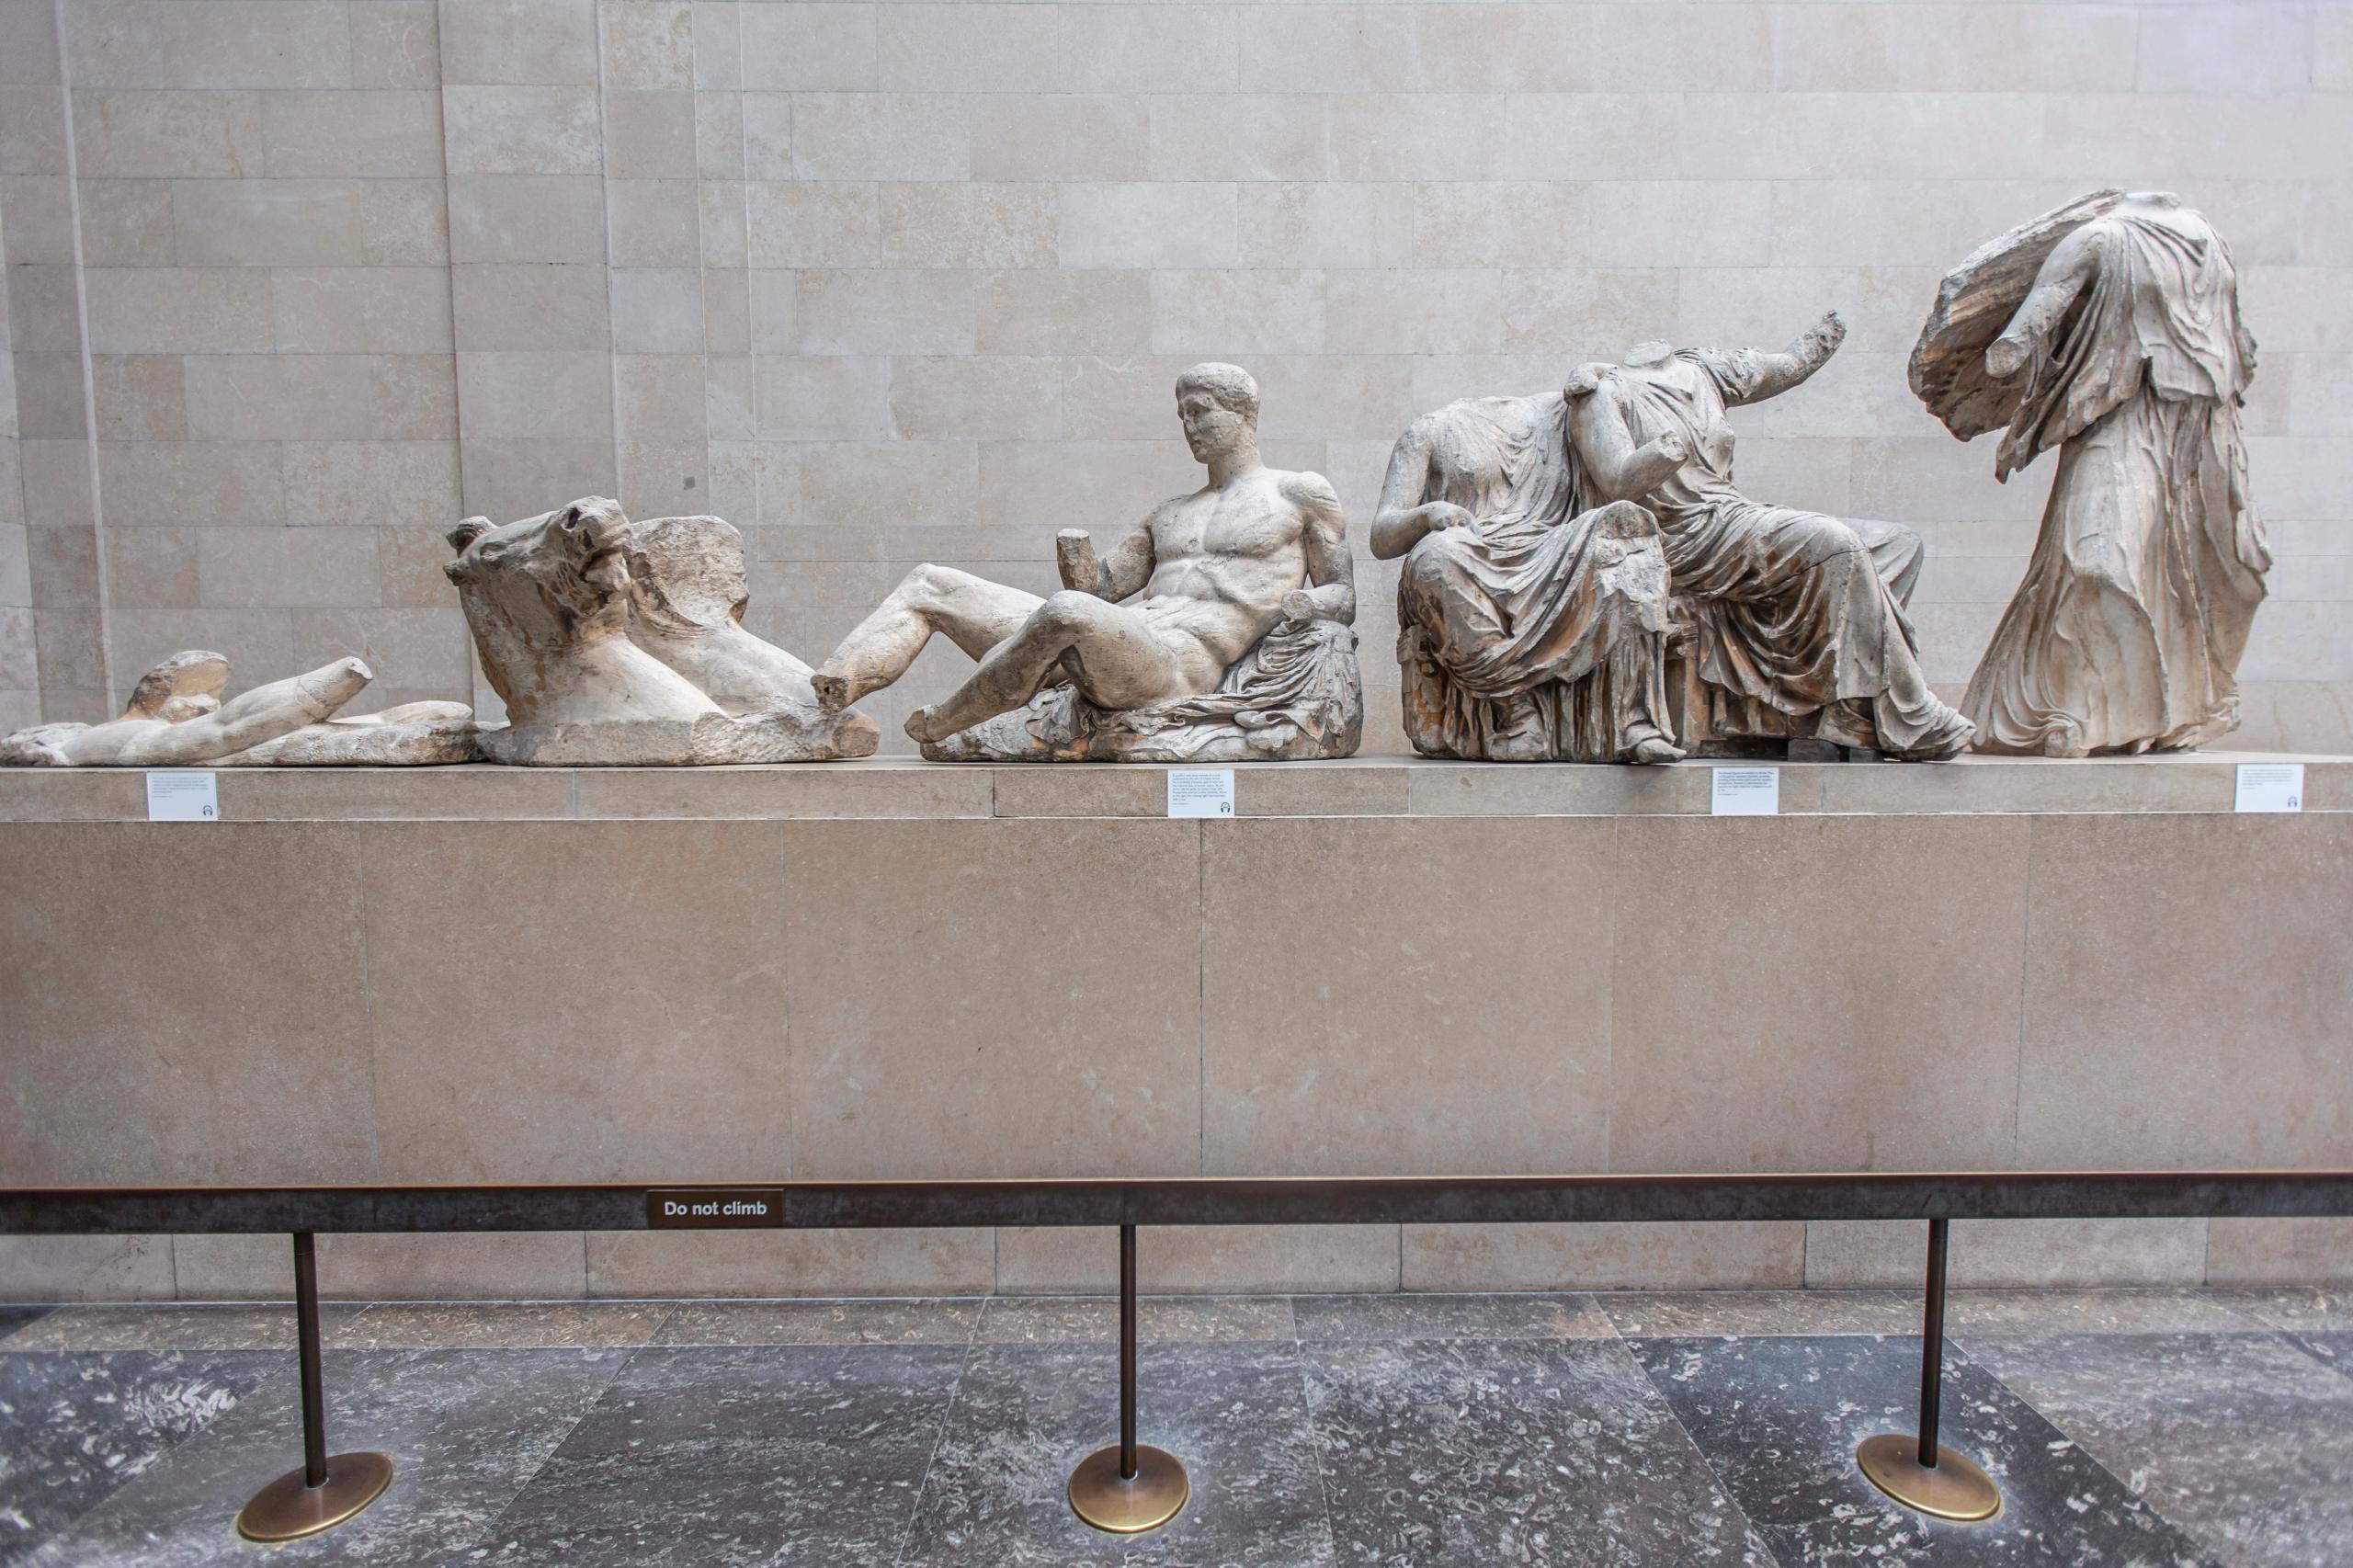 British Museum Chair Rebukes Calls to ‘Dismantle’ Parthenon MarblesCollection